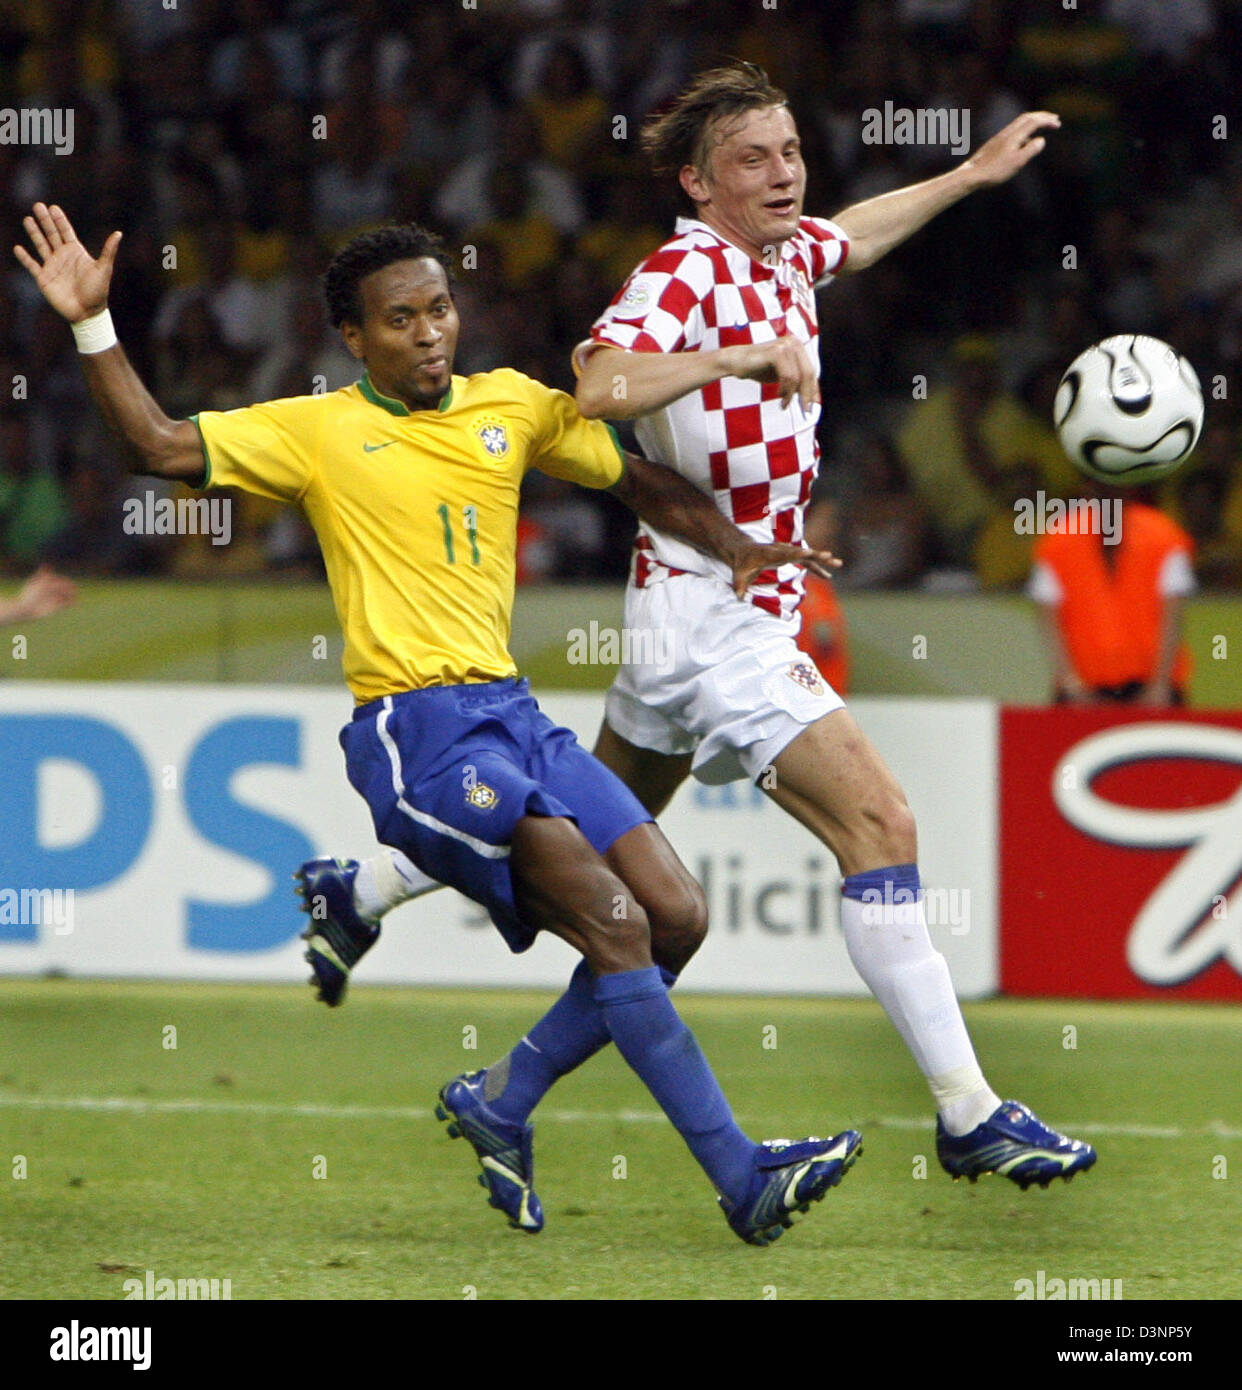 Brazilian Robinho (L) fights for the ball with Croatia's Niko Kranjcar during the FIFA World Cup 2006 group F preliminary match Brazil vs Croatia at the Olympic Stadium in Berlin, Germany, Tuesday, 13 June 2006. Photo: WOLFGANG KUMM +++ Mobile Services OUT +++ Please refer to FIFA's Terms and Conditions. Stock Photo